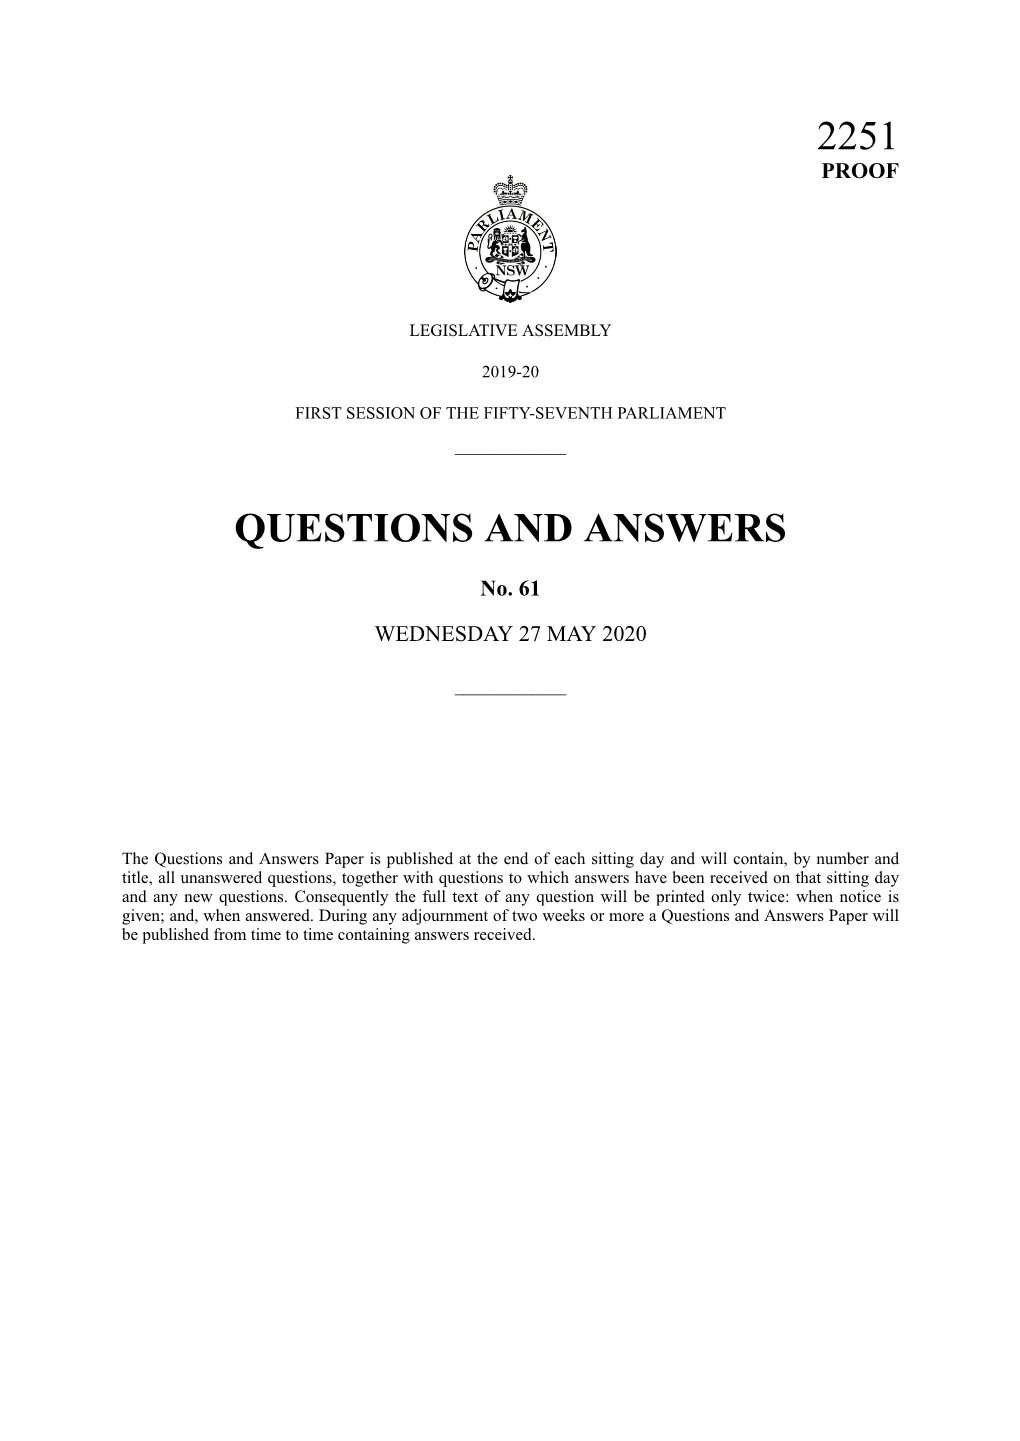 Questions and Answers 2251